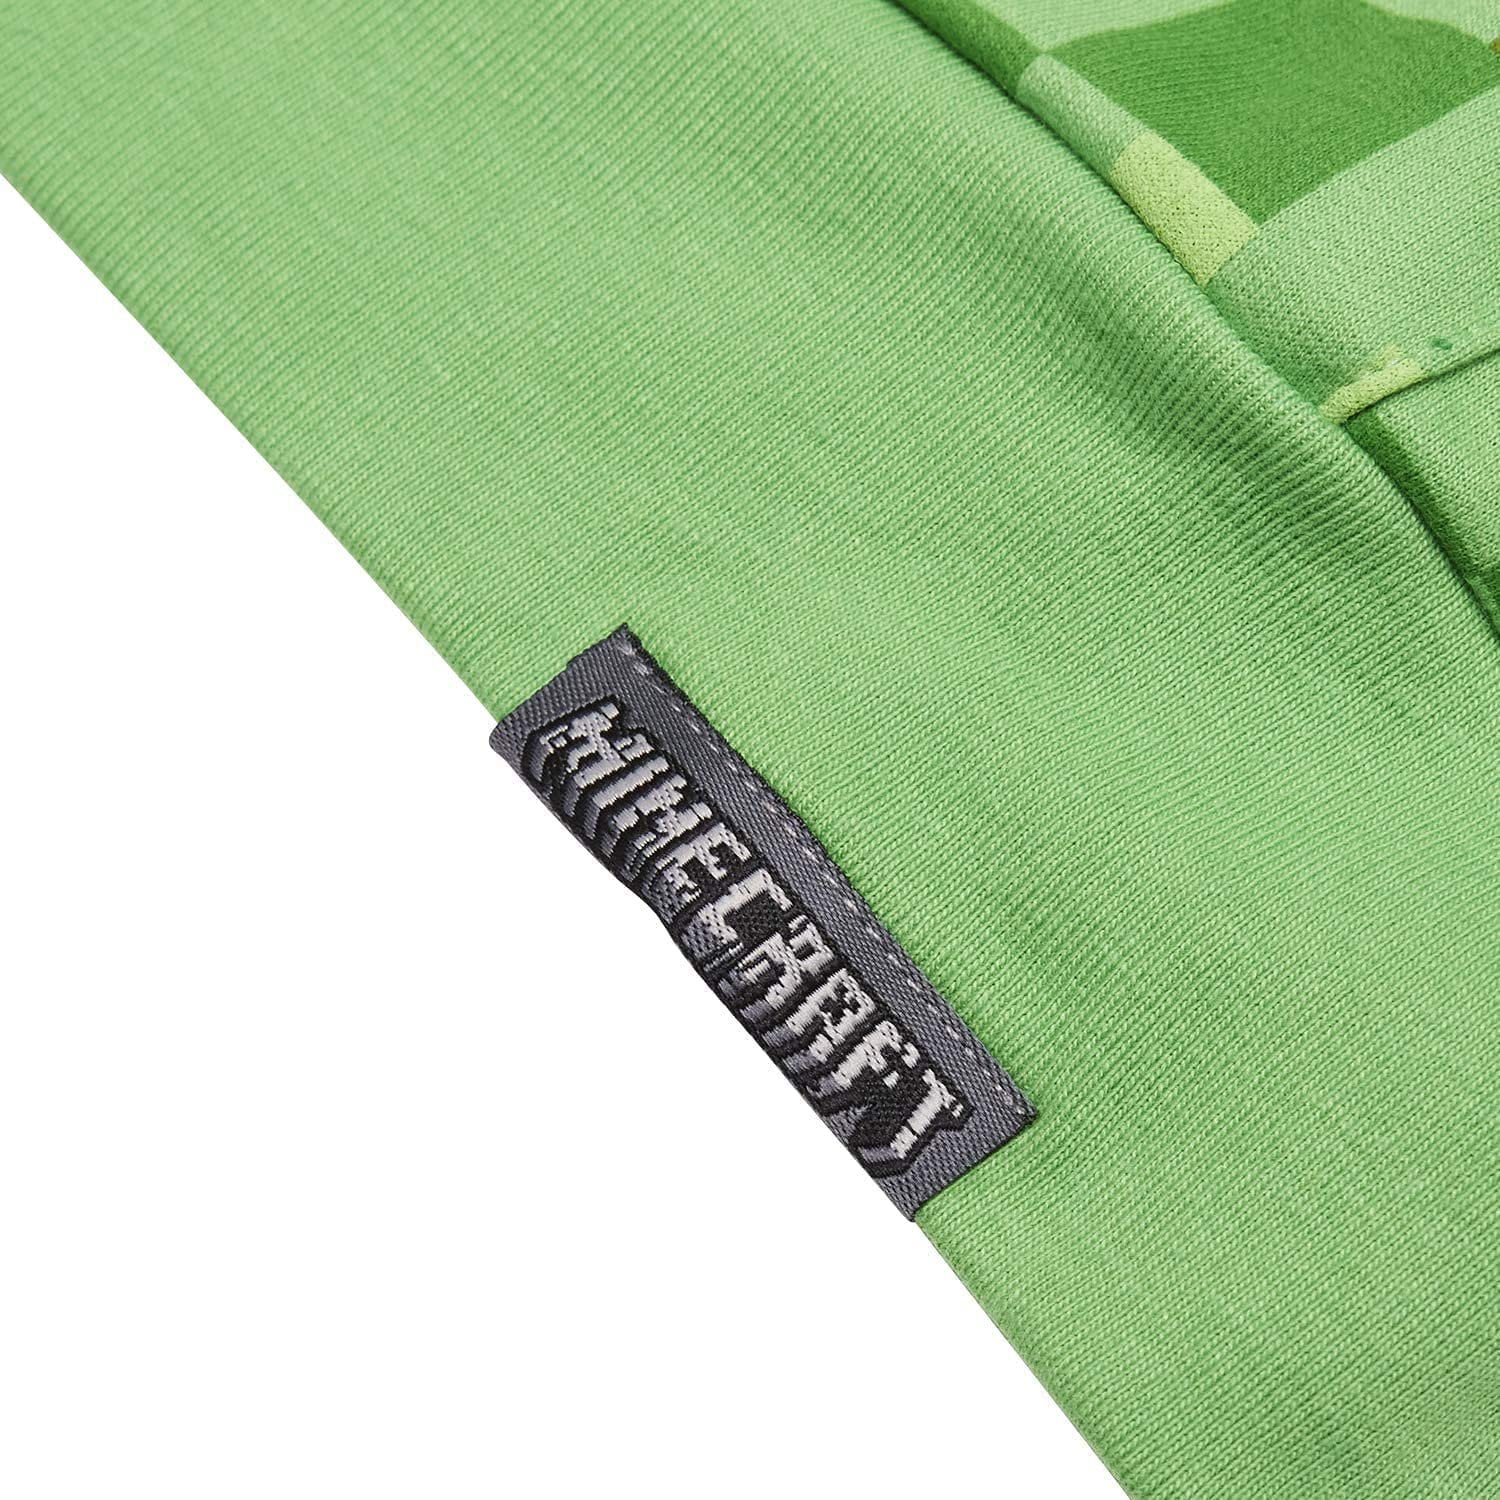 Minecraft Creeper Boy's Green Hoodie, Sizes 5-14, Size: 9-10 Years